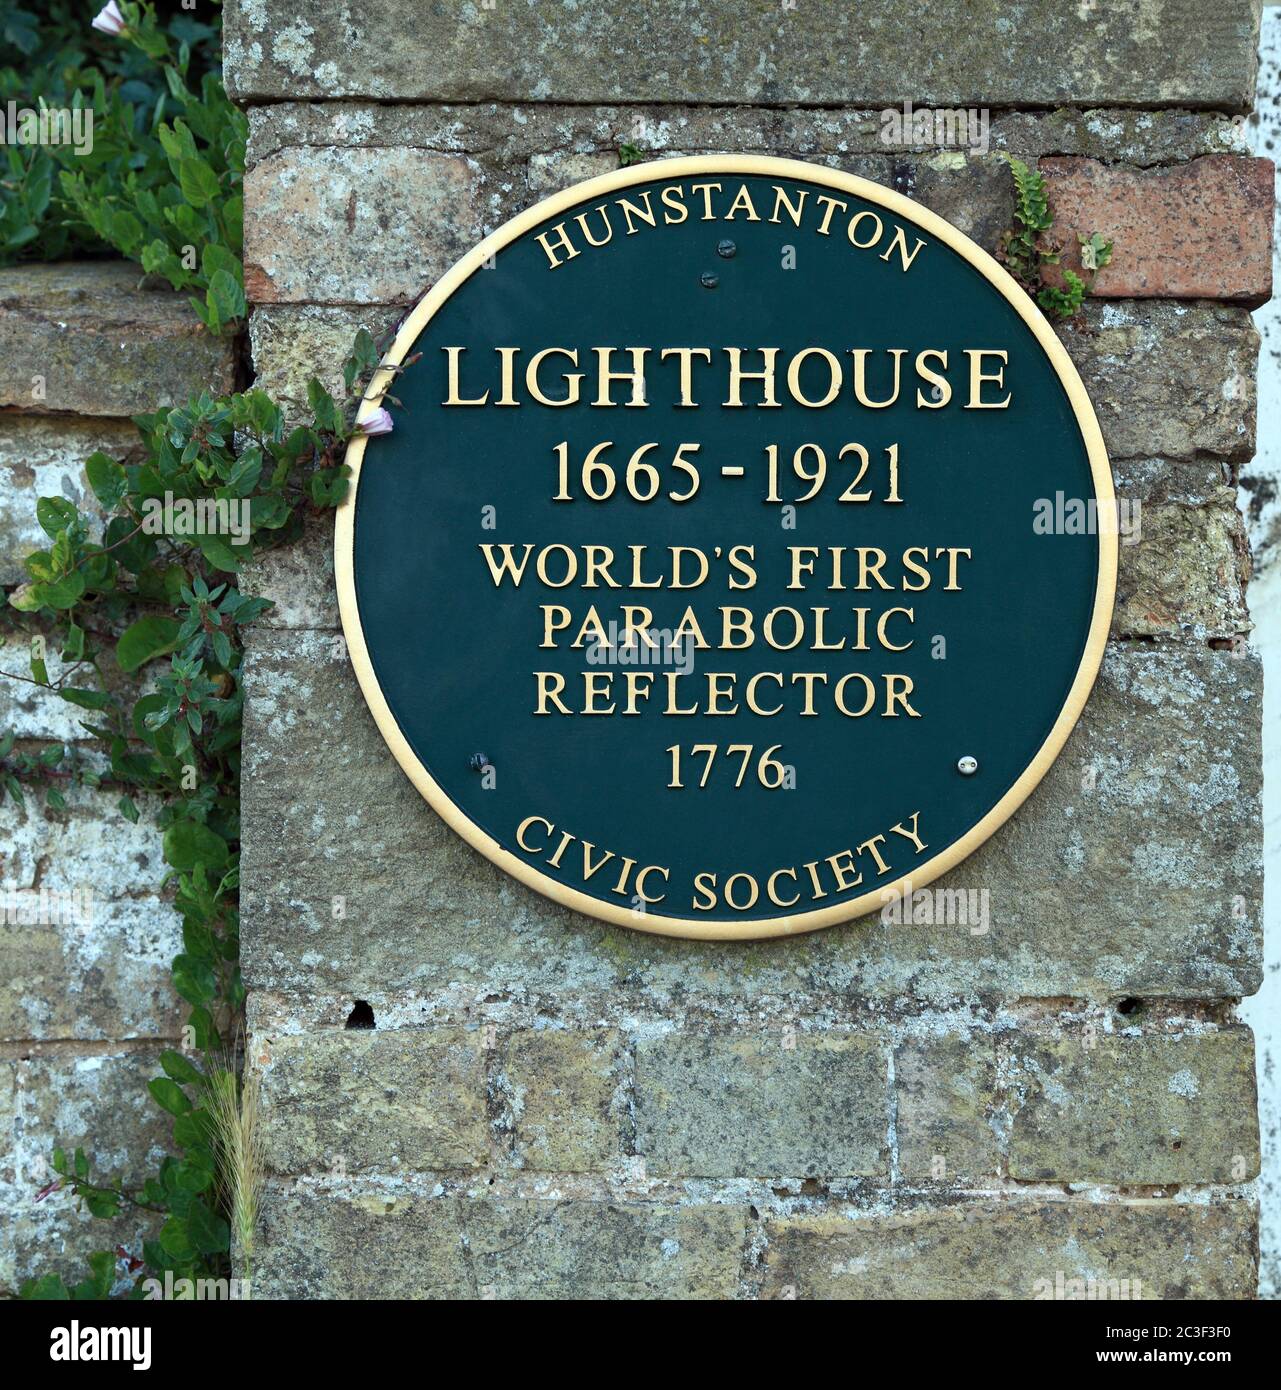 Hunstanton Lighthouse, Civic Society Sign, Norfolk, Angleterre, Royaume-Uni Banque D'Images